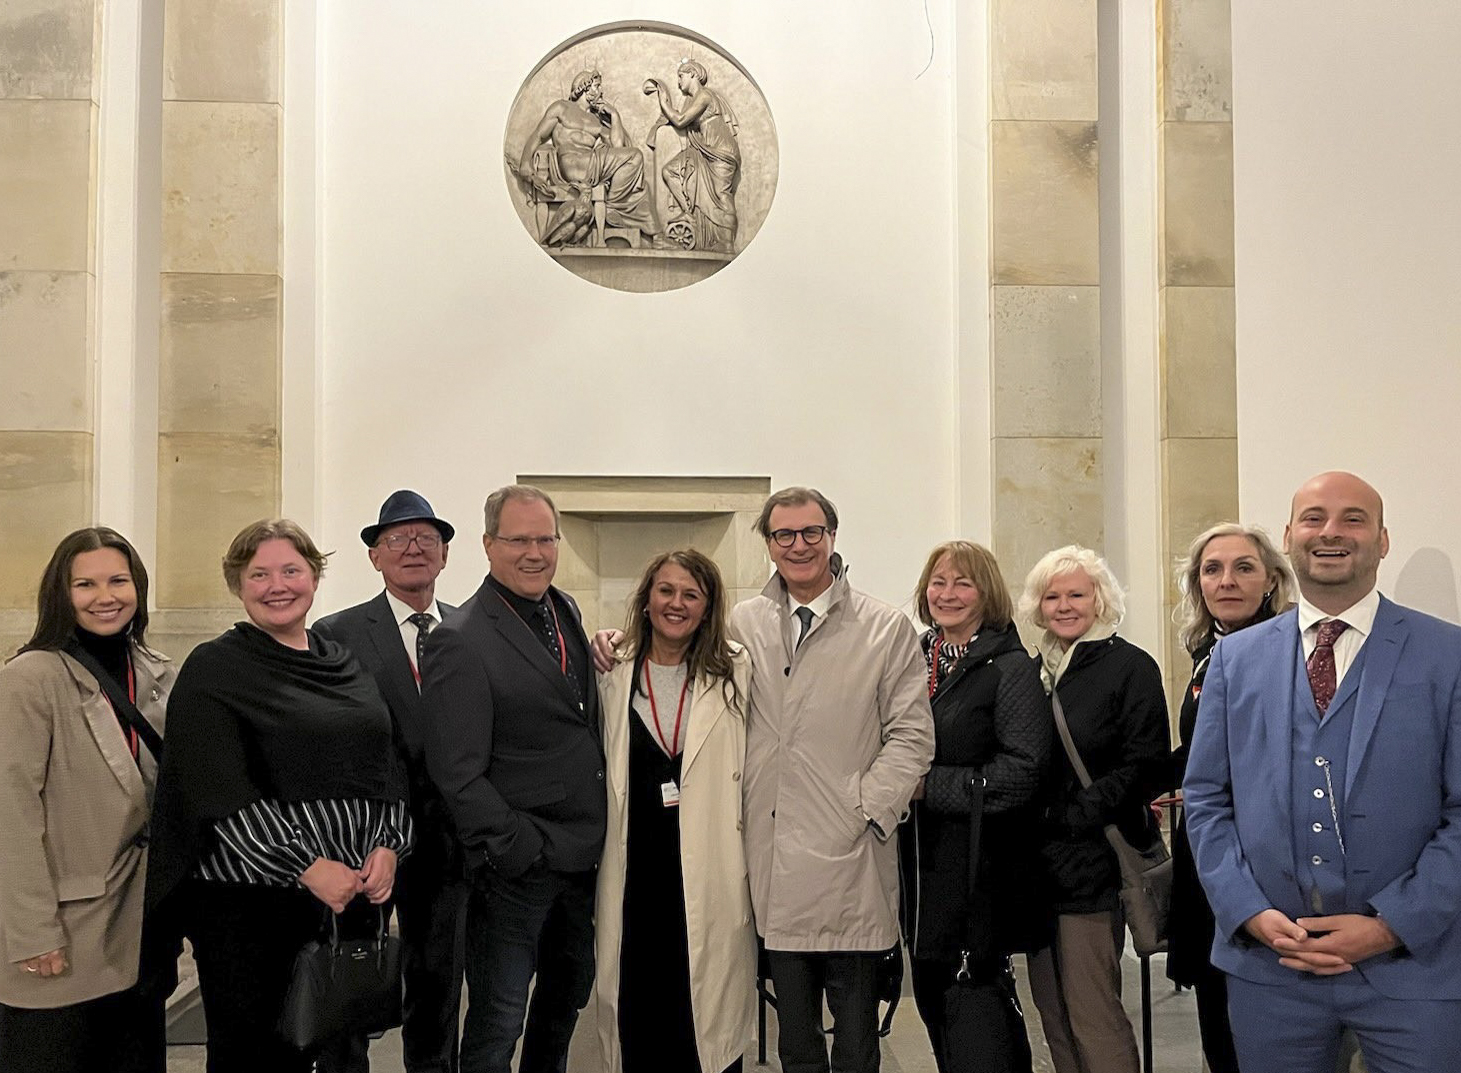 Senators Pierre-Hugues Boisvenu, Donna Dasko, and Rebecca Patterson pose with other members of the Canadian delegation to the 69th Annual Session of the NATO Parliamentary Assembly in Copenhagen.